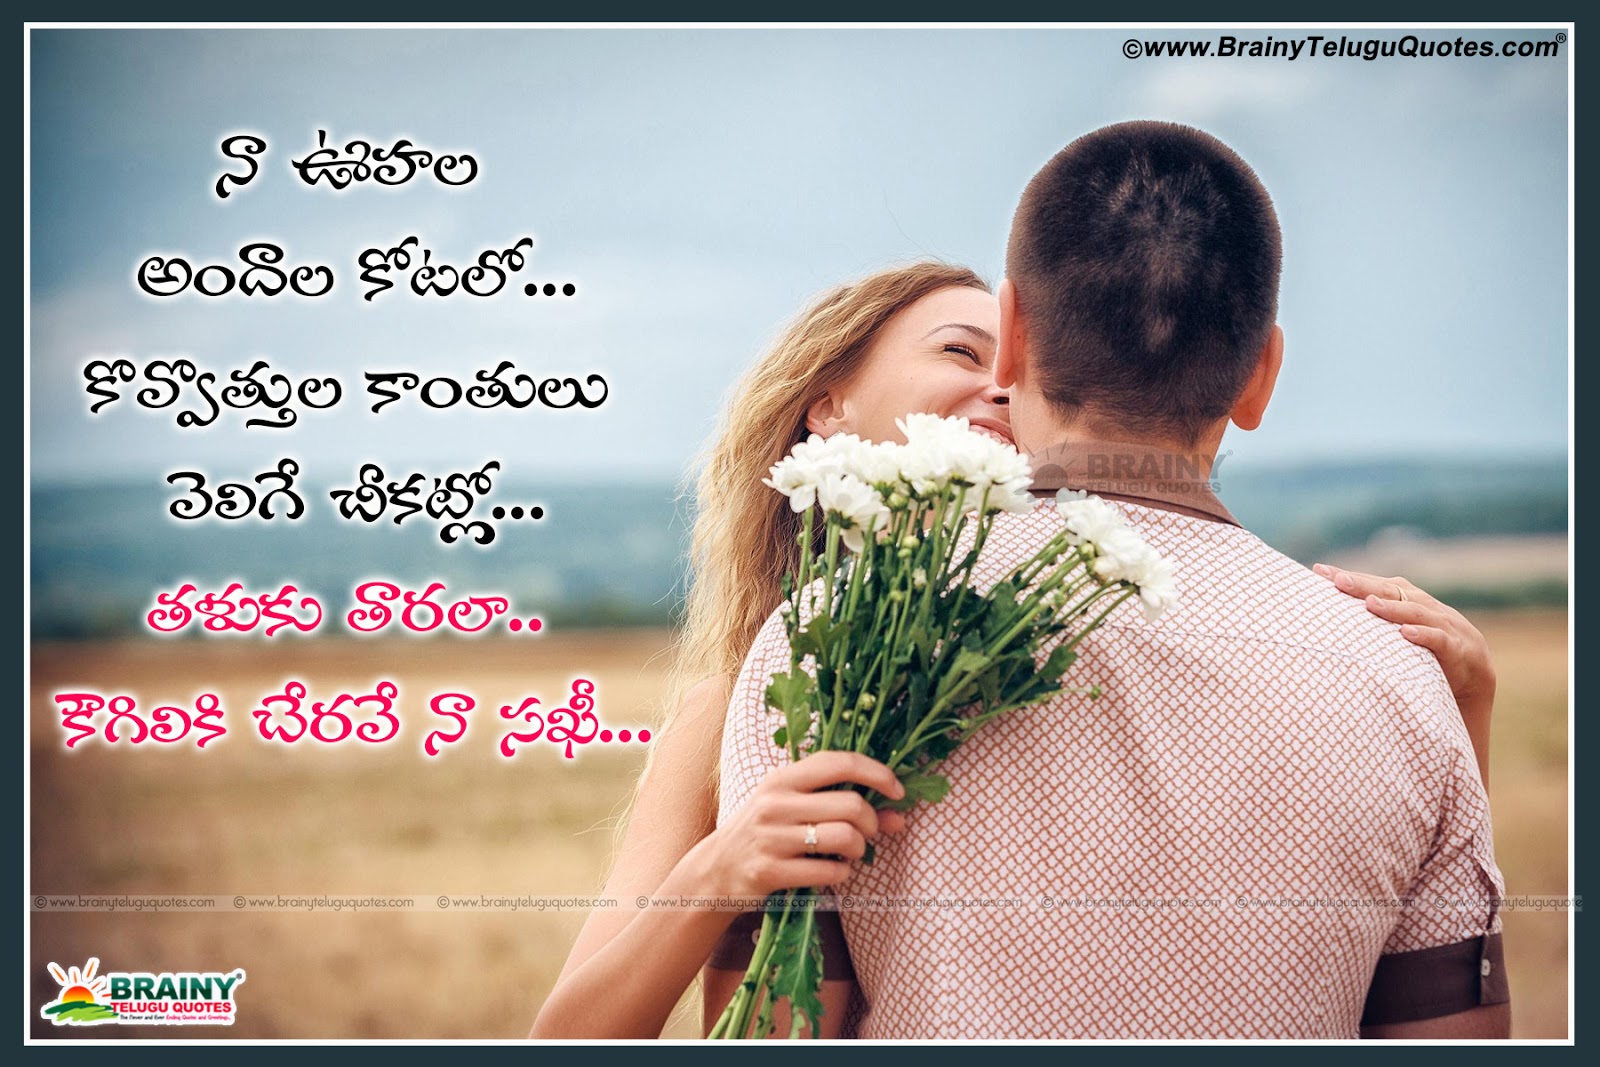 Heart Touching Love Quotes That Say It Just Right Heart Touching Love Quotes Collection Brainyteluguquotes Comtelugu Quotes English Quotes Hindi Quotes Tamil Quotes Greetings Your sanctity and your care is worth emulating. heart touching love quotes that say it